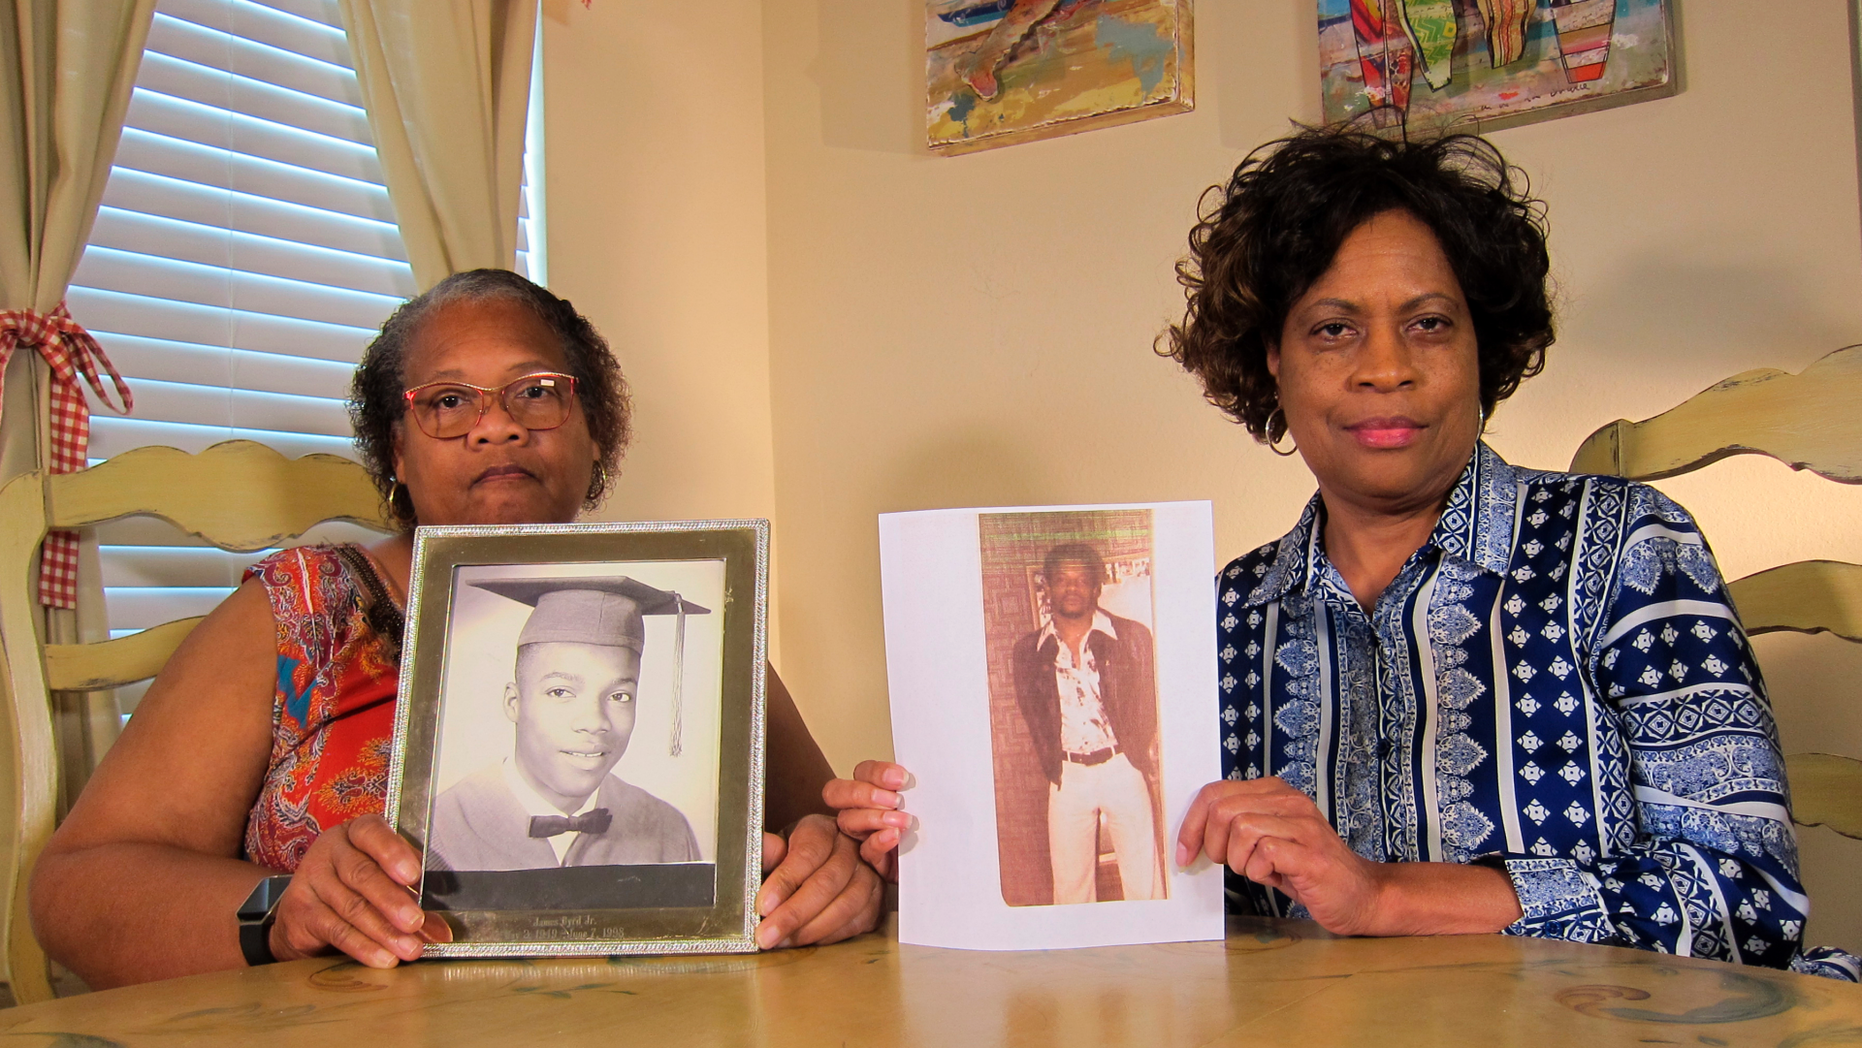 On Wednesday, April 10, 2019, the photo Mylinda Byrd Washington, 66, on the right, and Louvon Byrd Harris, 61, present photographs of their brother James Byrd Jr. in Houston. James Byrd Jr. has fallen victim to what is considered one of the most abominable hate crime murders in recent Texas history. (AP Photo / Juan Lozano)